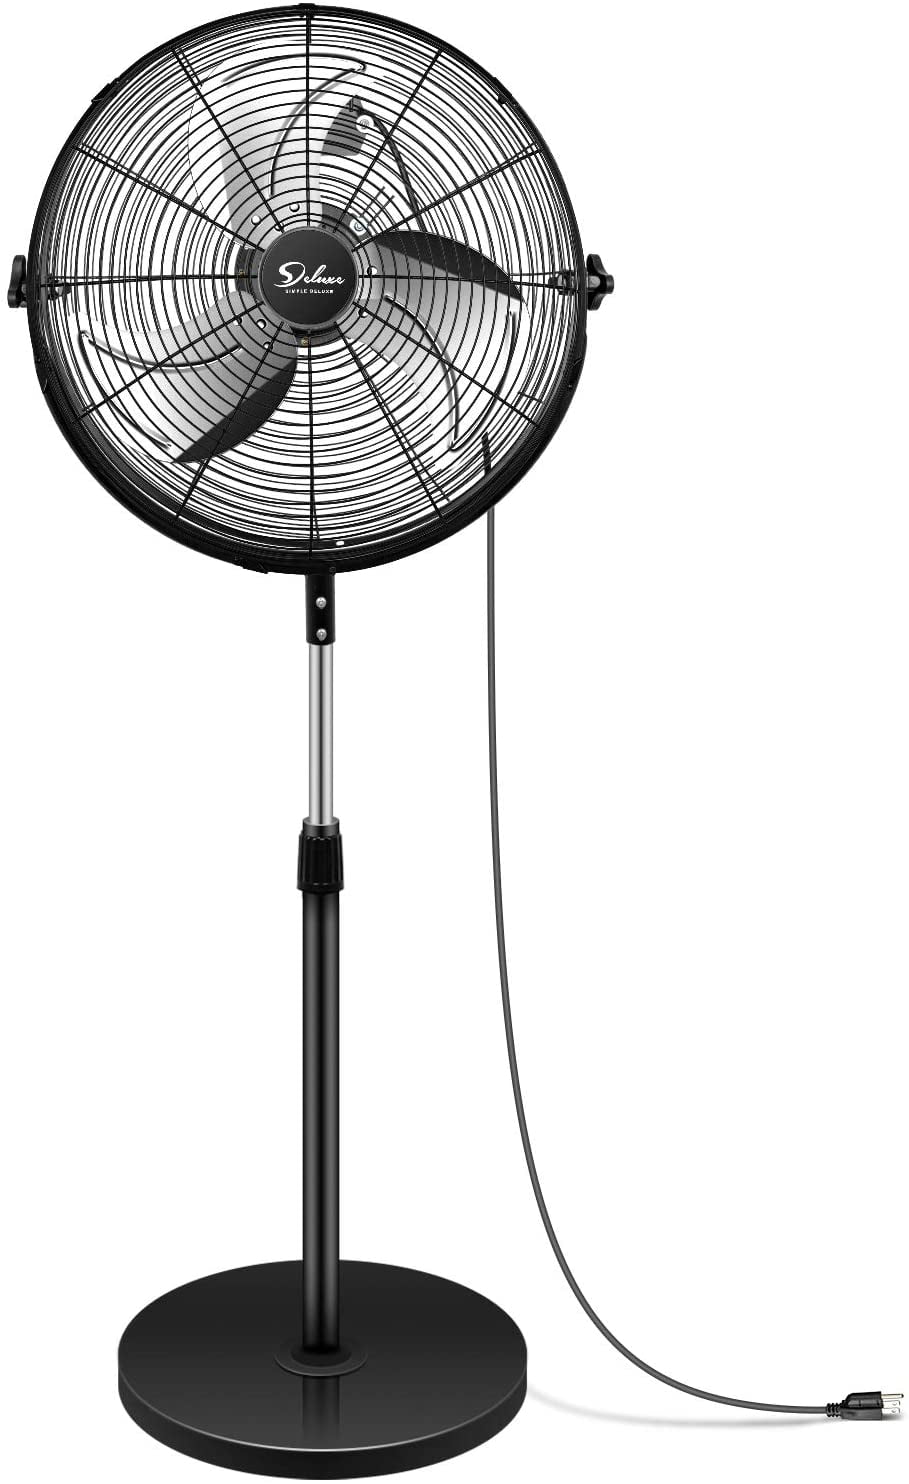 Prem-i-air 18 Pedestal High Velocity Fan ideal for home or office 